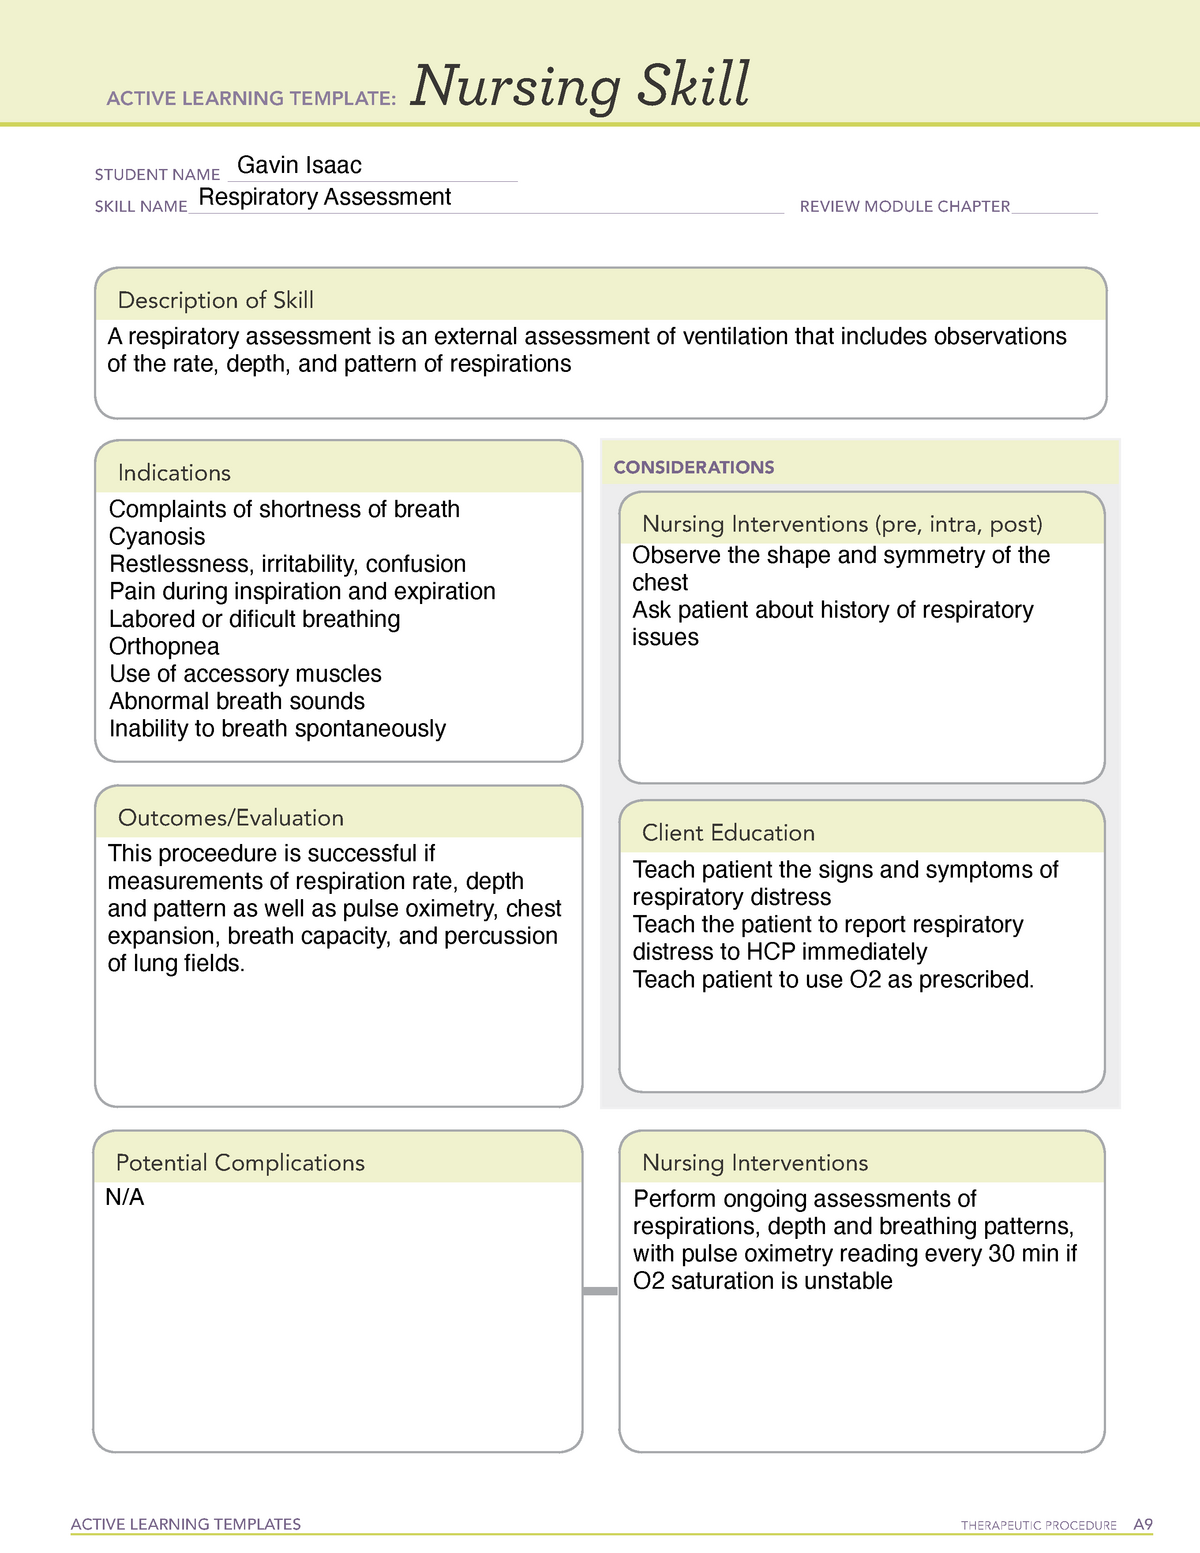 Skill Resp Assessment - Active Learning Template - ACTIVE LEARNING ...